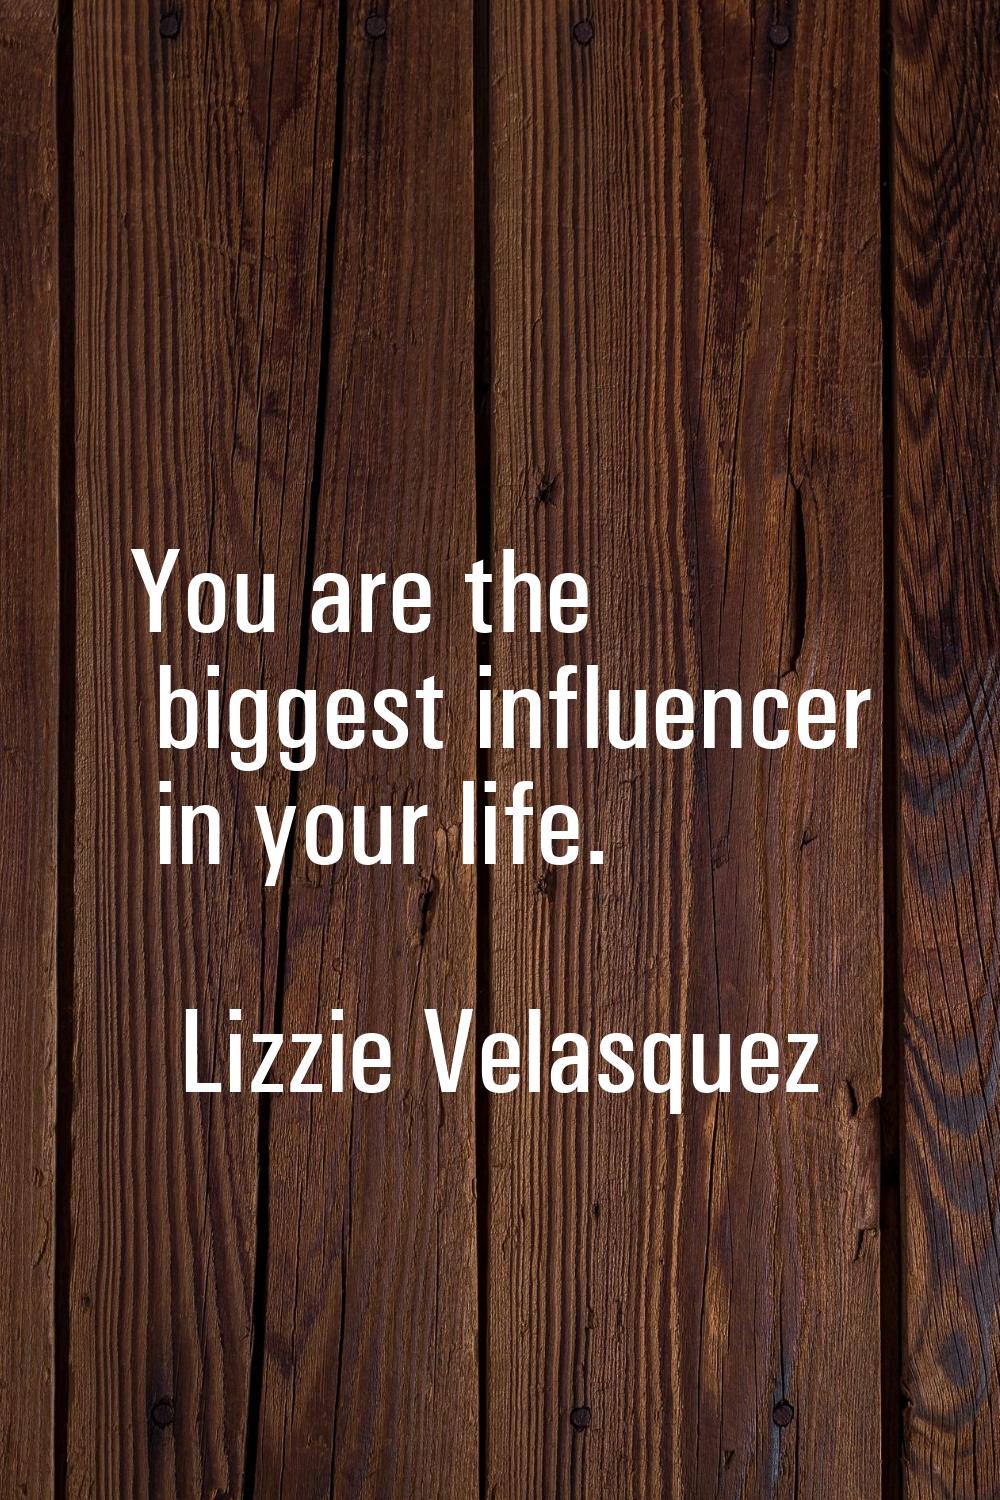 You are the biggest influencer in your life.